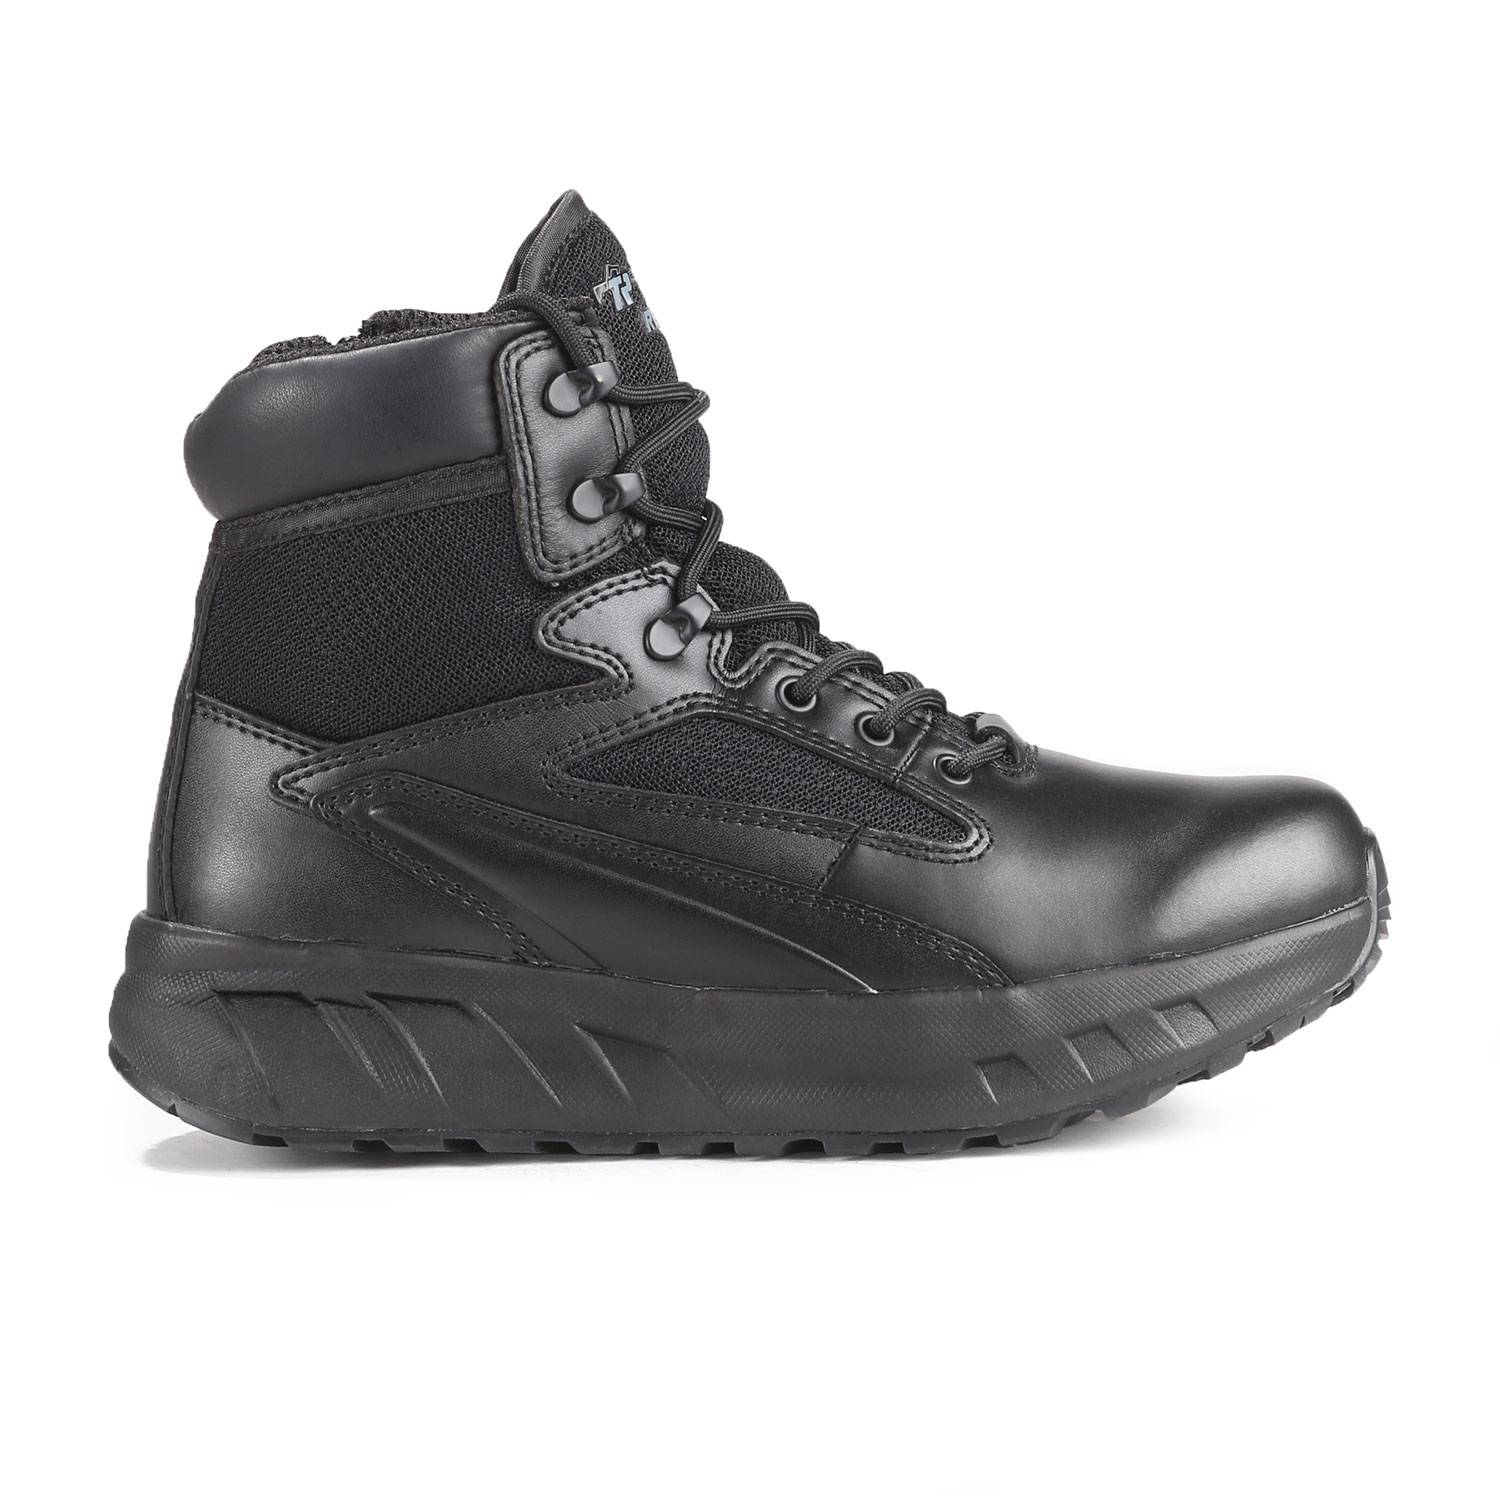 Tactical Research by Belleville Maximalist Tactical Boots